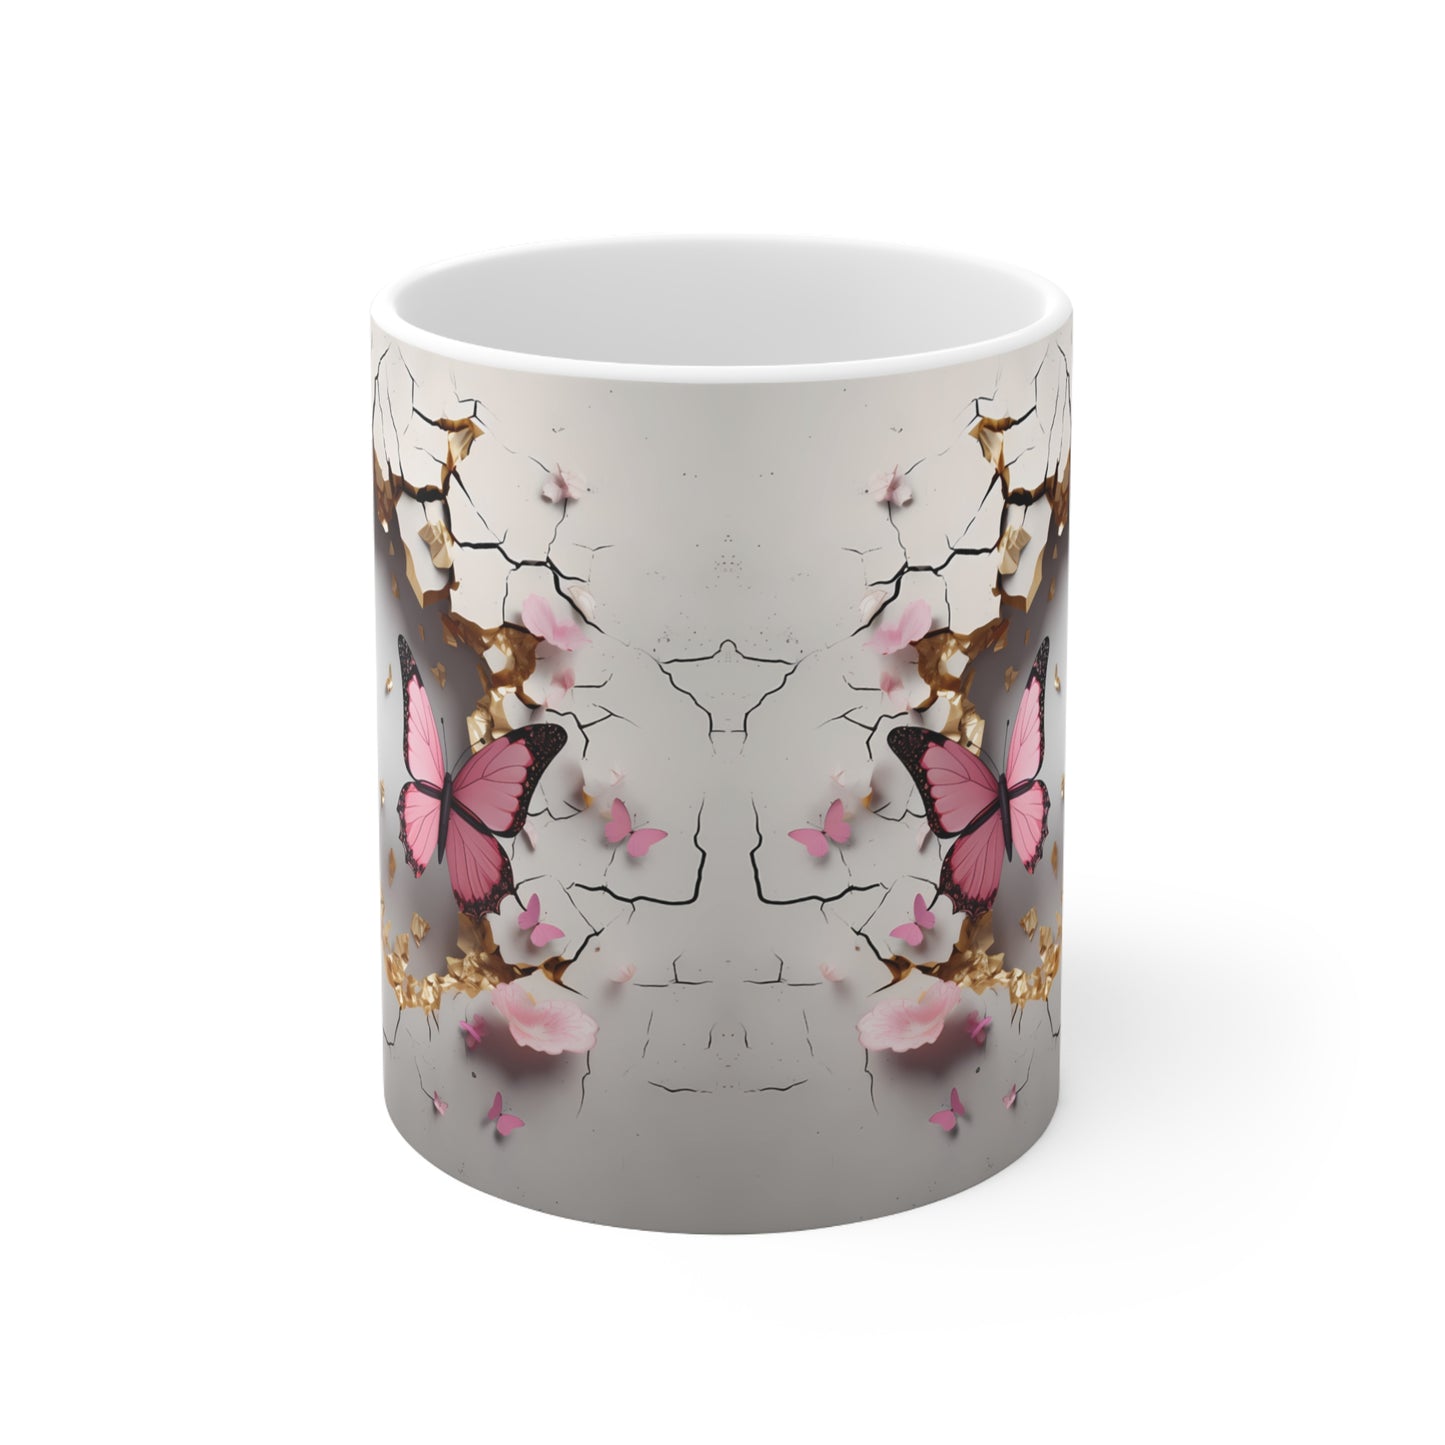 3D Crack In A Wall Pink Butterfly, Butterfly coffee mug, Mug design, Mug wrap, 3D mug wrap, butterfly mug, Ceramic Mug 11oz